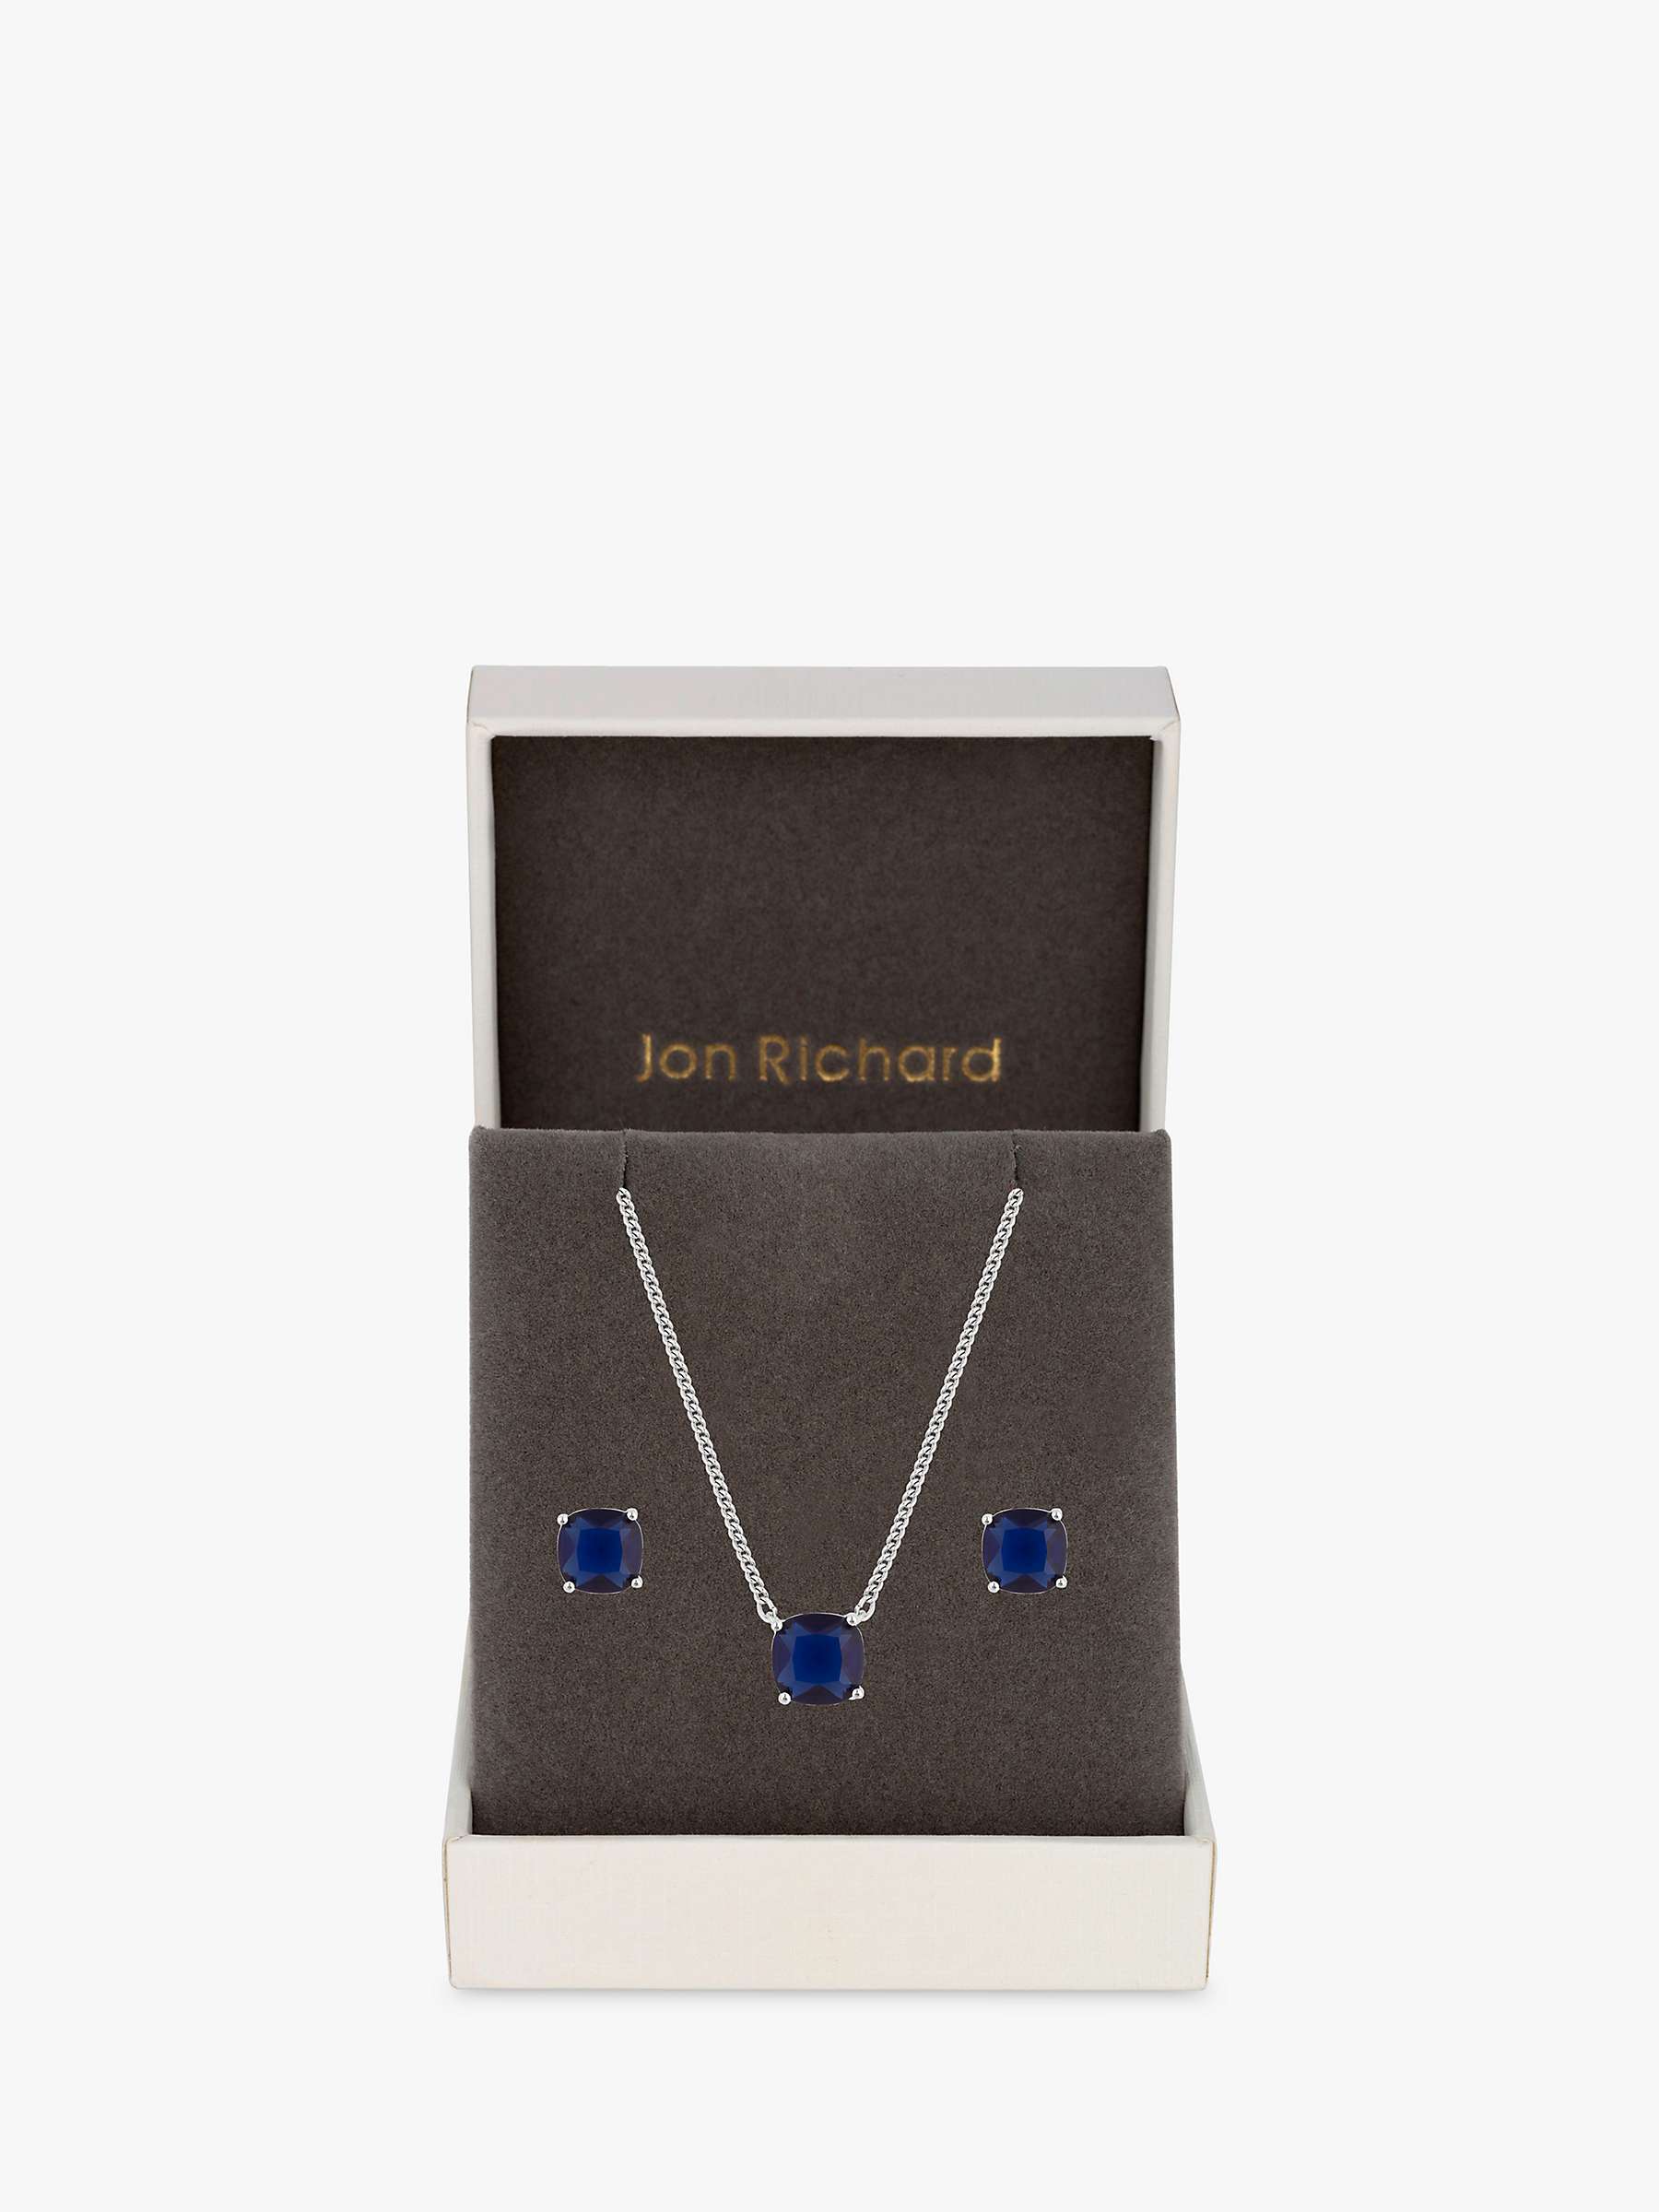 Buy Jon Richard Cubic Zirconia Open Stone Necklace and Earrings Set, Silver/Blue Online at johnlewis.com